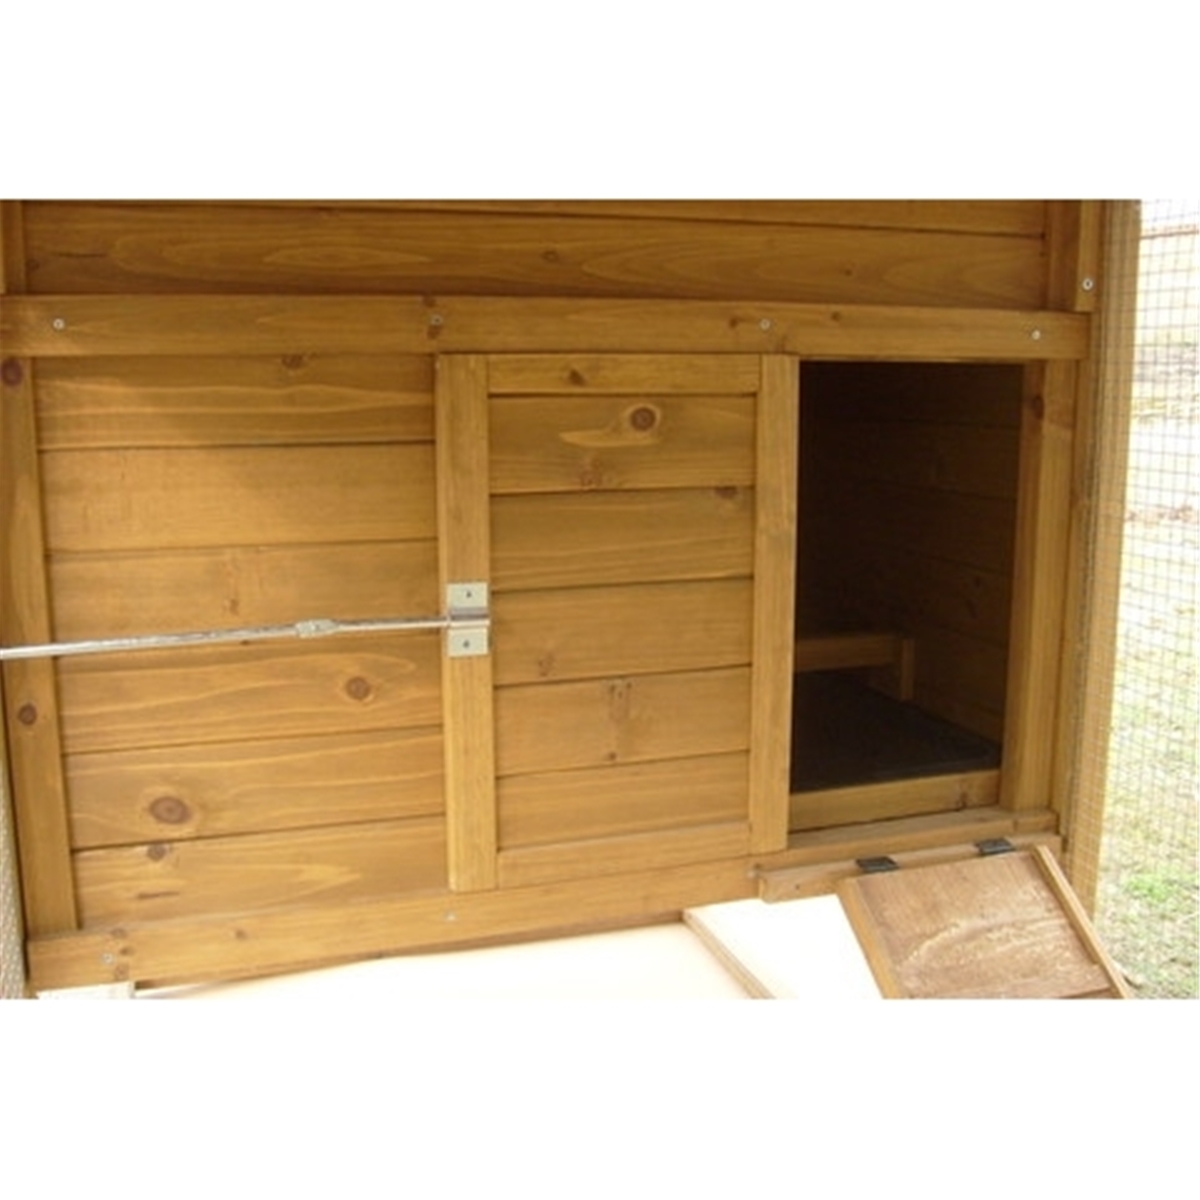 ... Great : WINCHESTER CHICKEN COOP + FREE RUN - HOUSES 6-8 CHICKENS